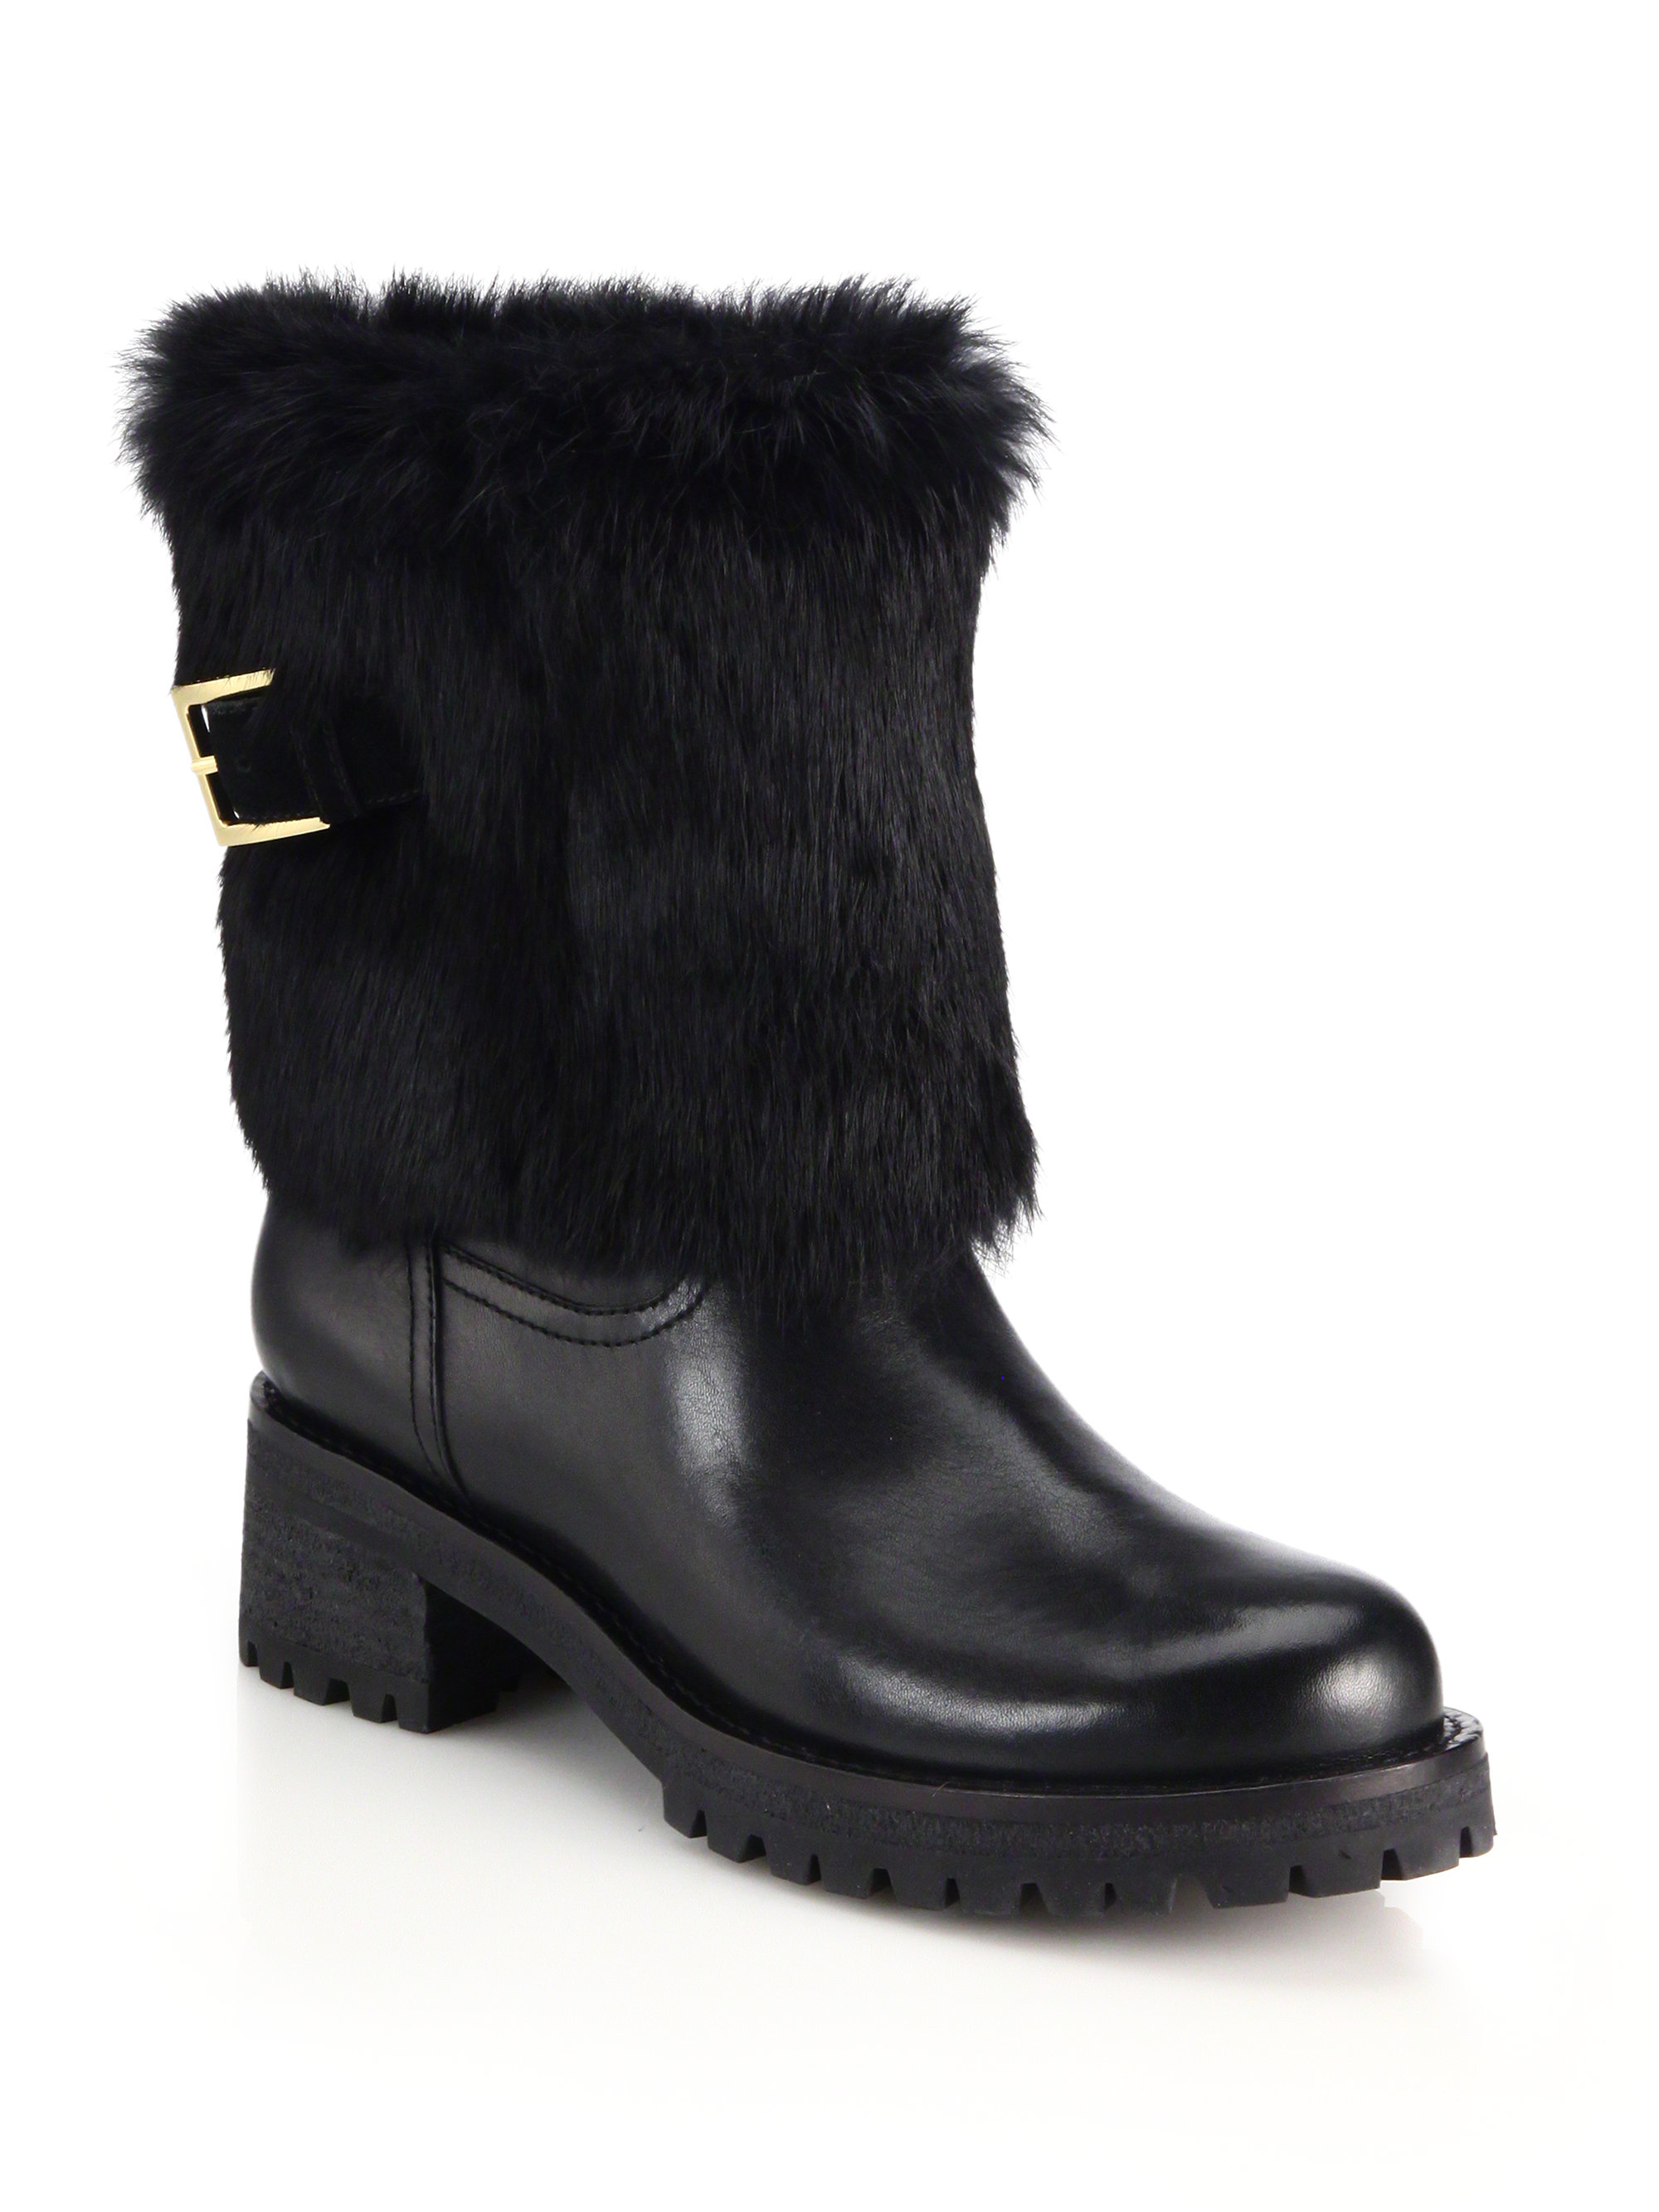 Lyst - Tory Burch Joni Rabbit Fur & Shearling-lined Leather Boots in Black